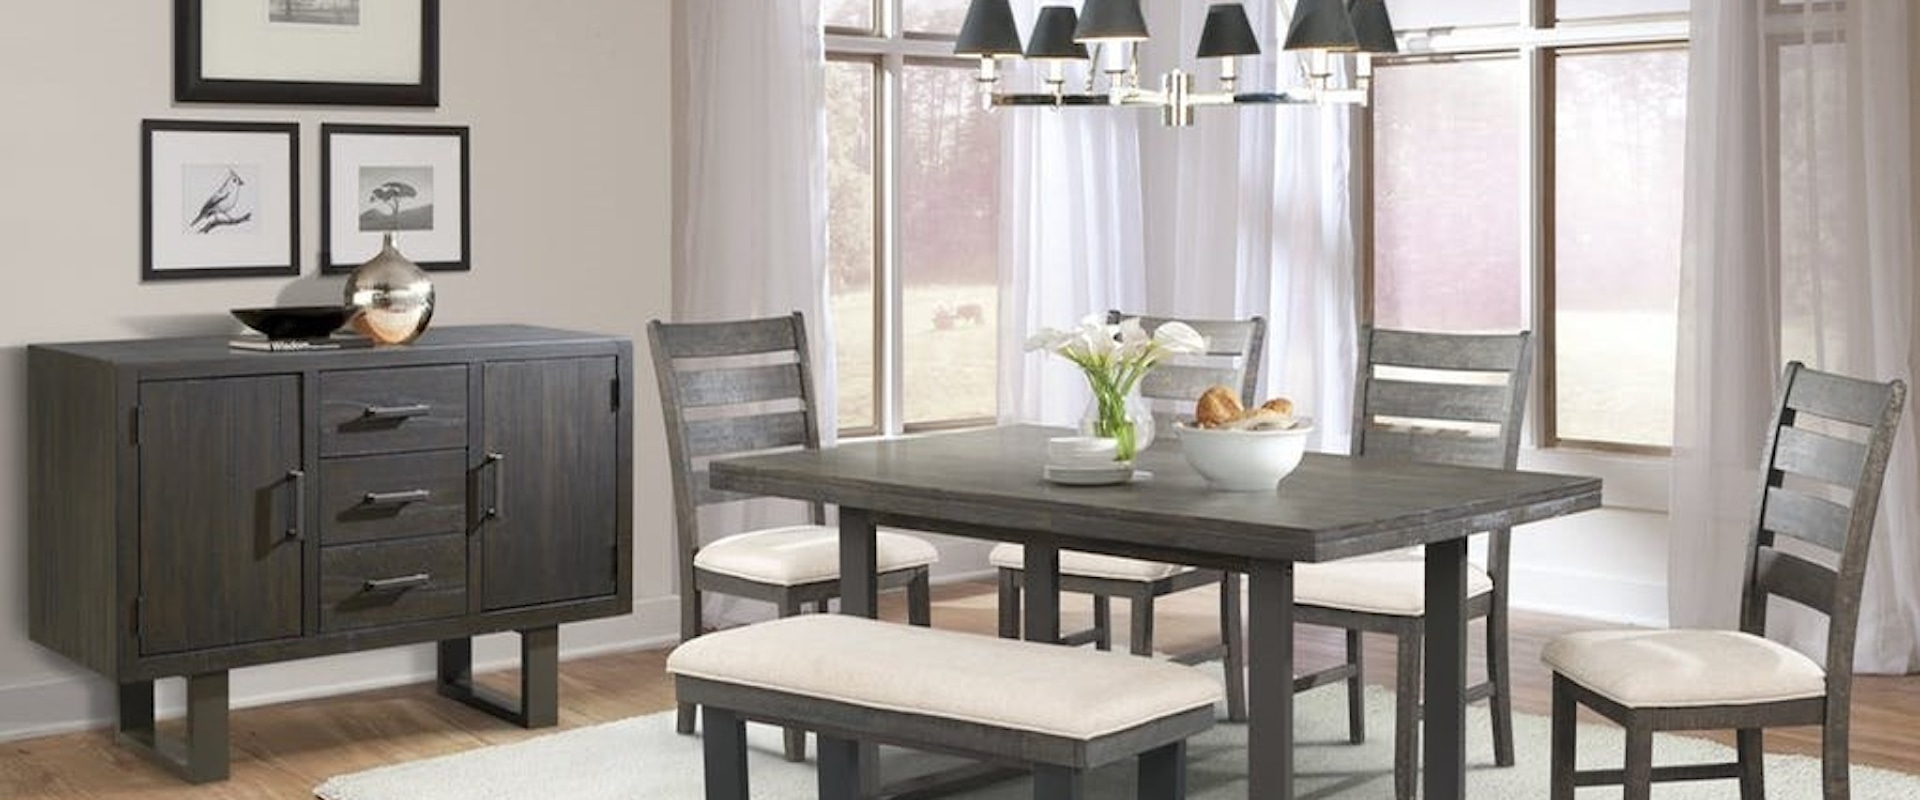 Rustic Dining Group with Bench